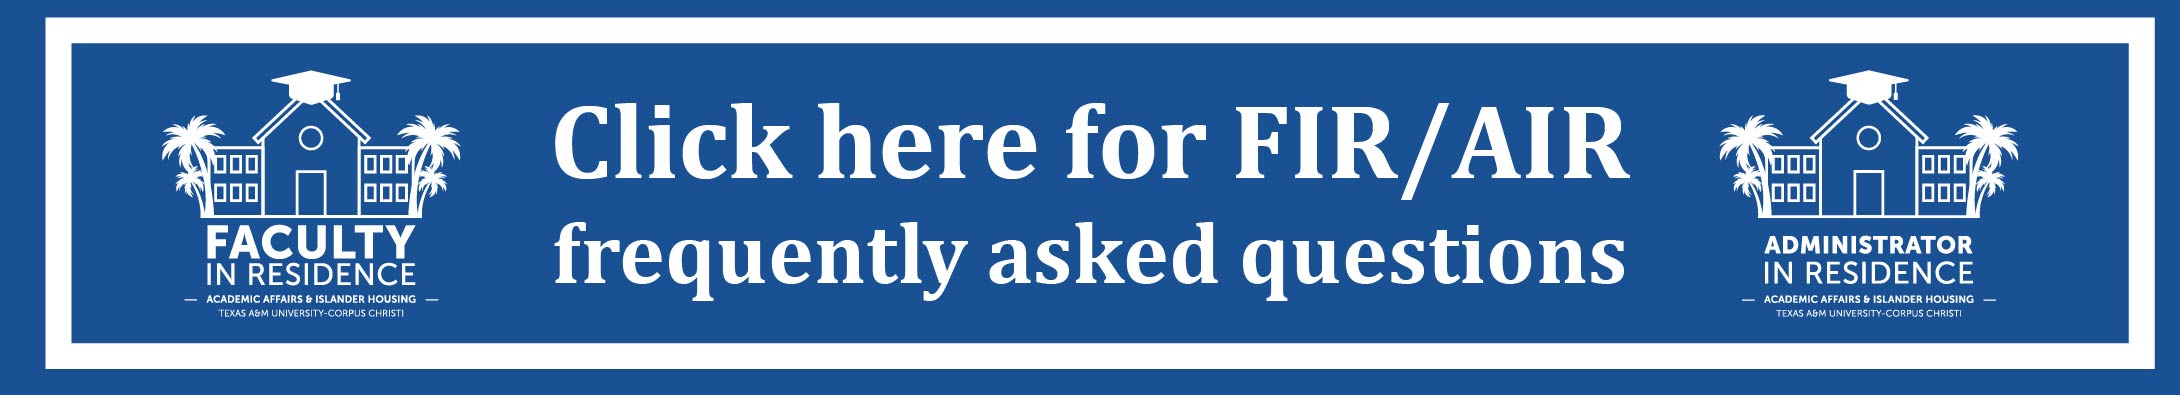 Click Here for FIR/AIR Frequently Asked Questions